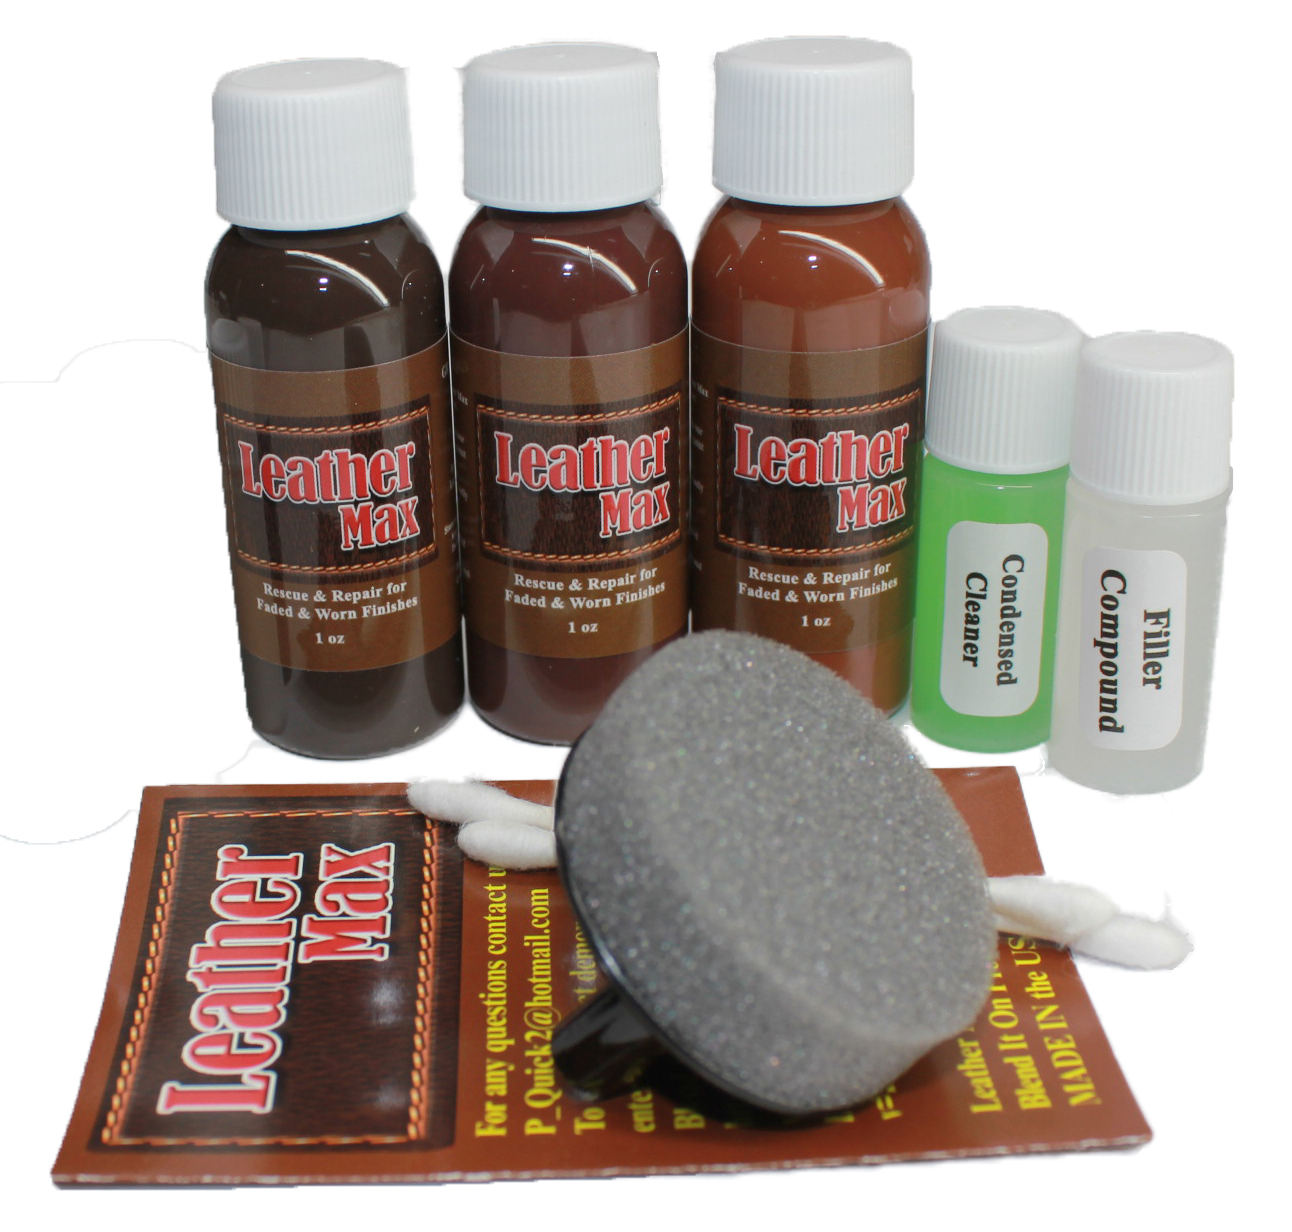 Leather Repair and Refinish for Handbags / Shoes / Boots / Jackets / Leather Max (Bold Brown) - image 1 of 11